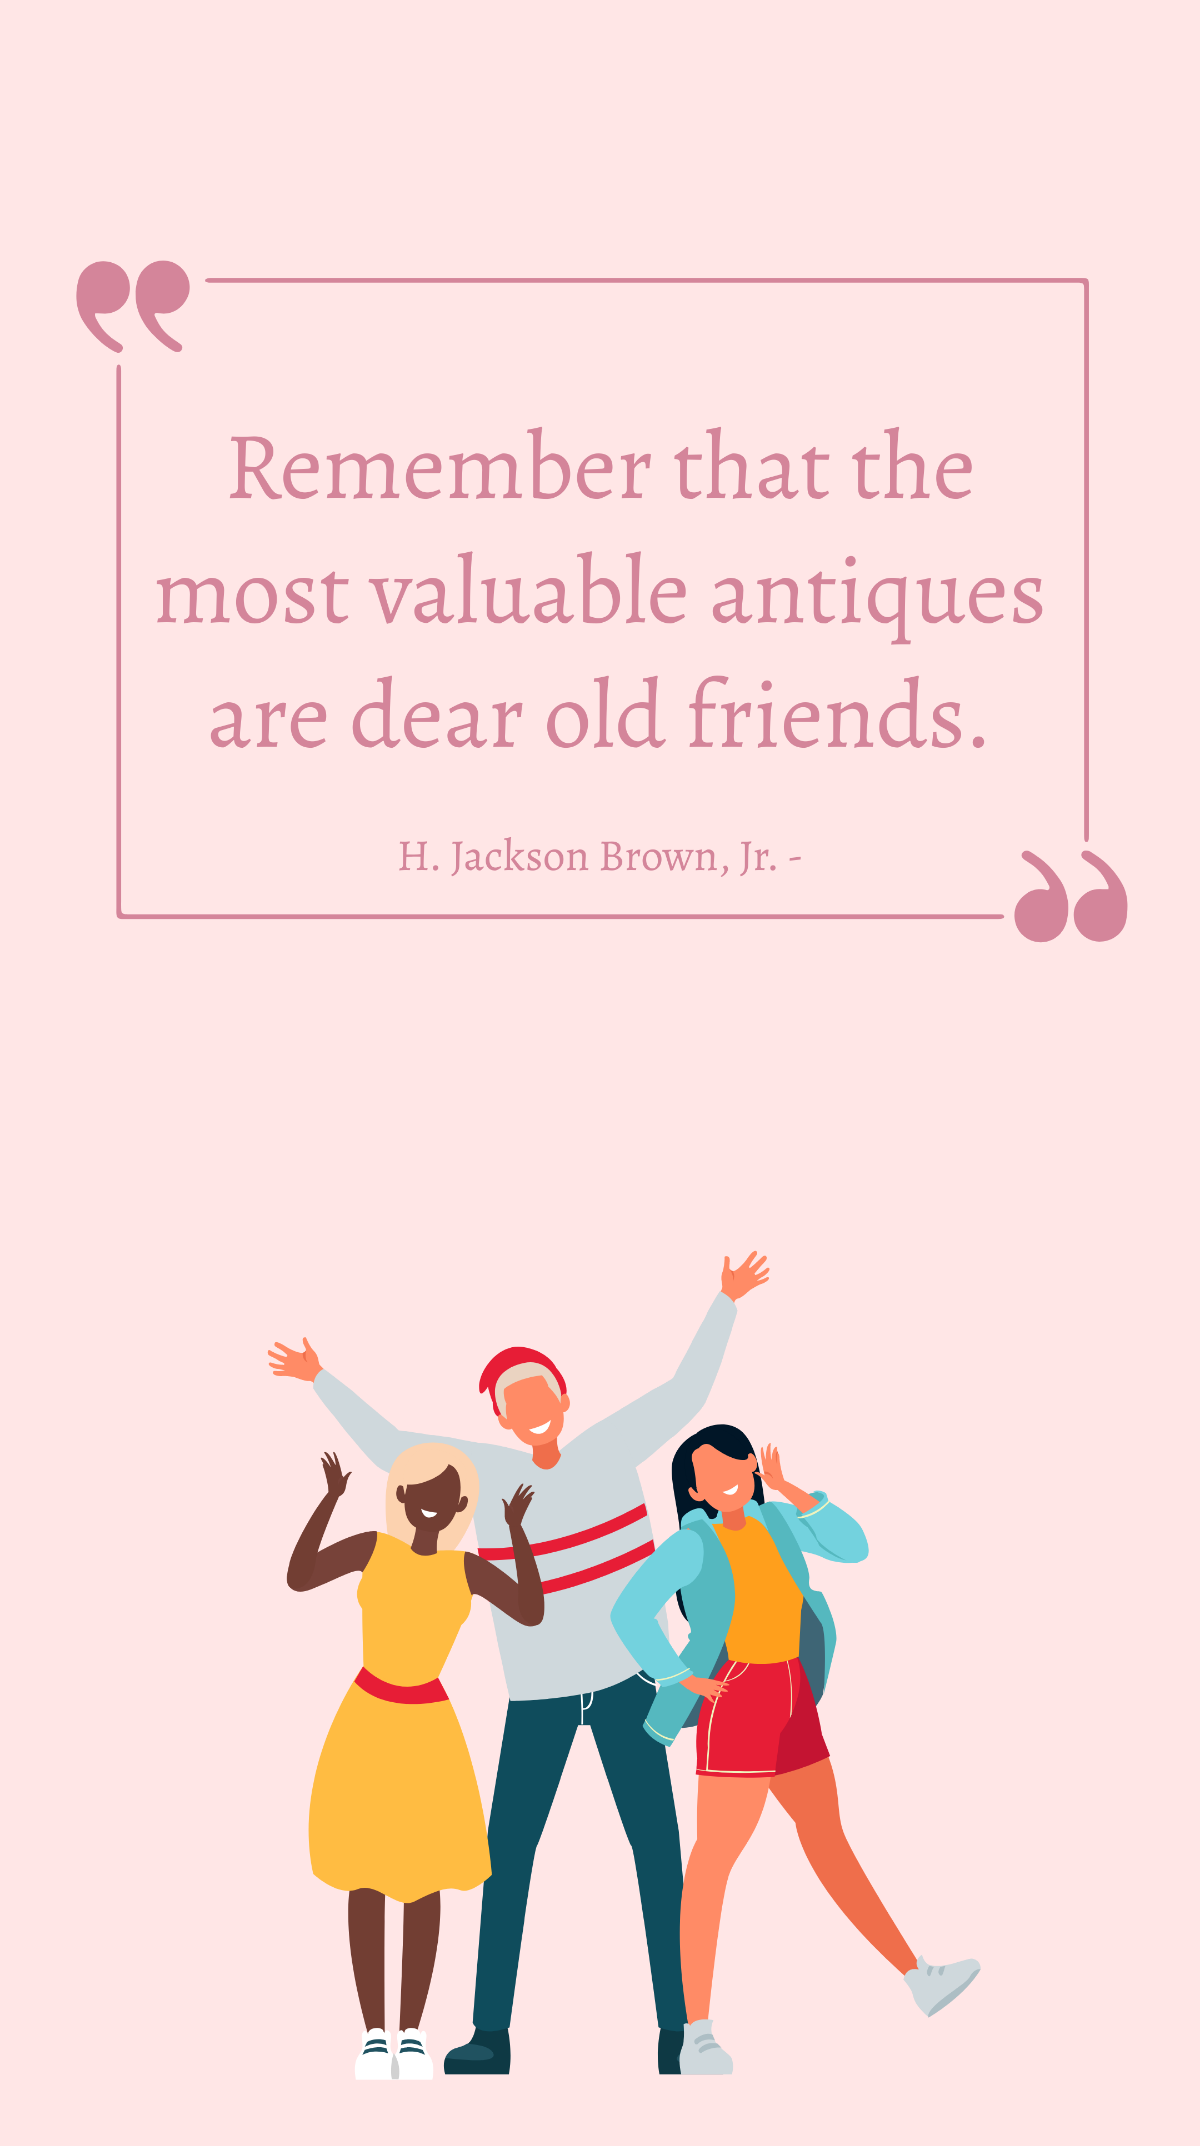 H. Jackson Brown, Jr. - Remember that the most valuable antiques are dear old friends. Template